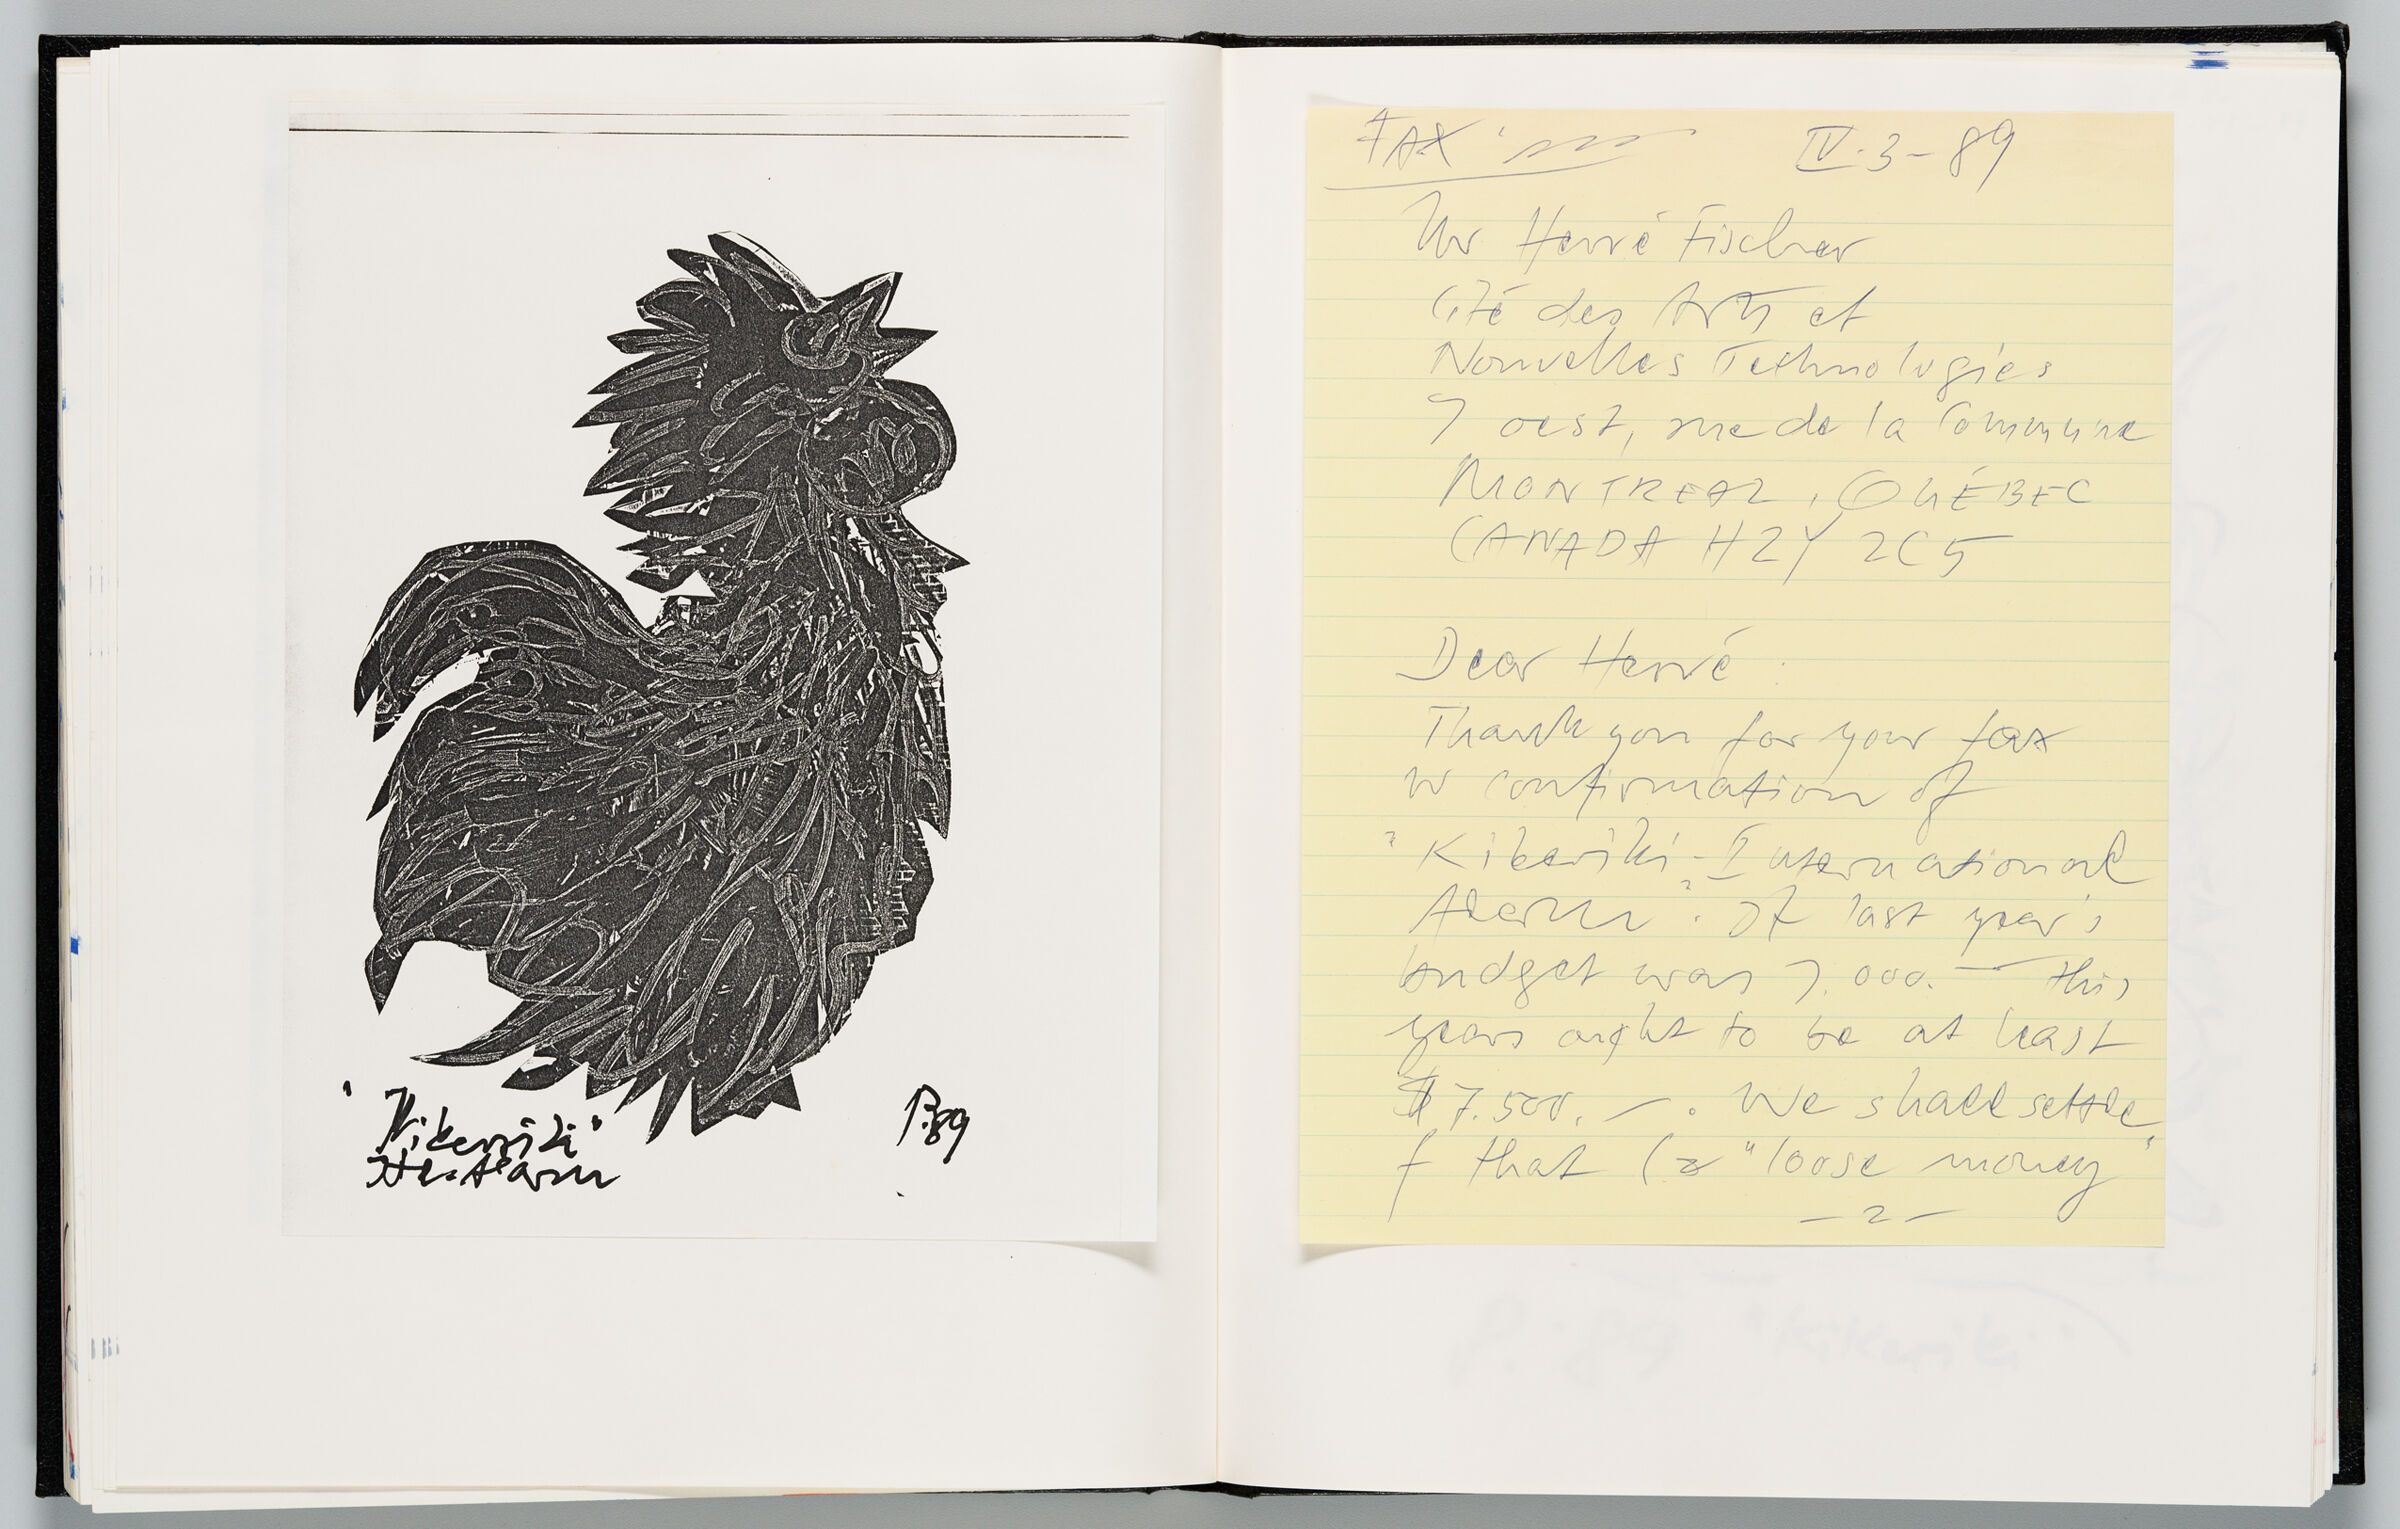 Untitled (Photocopy Of Rooster Sketch Cutout, Left Page); Untitled (Page Of Letter, Right Page)